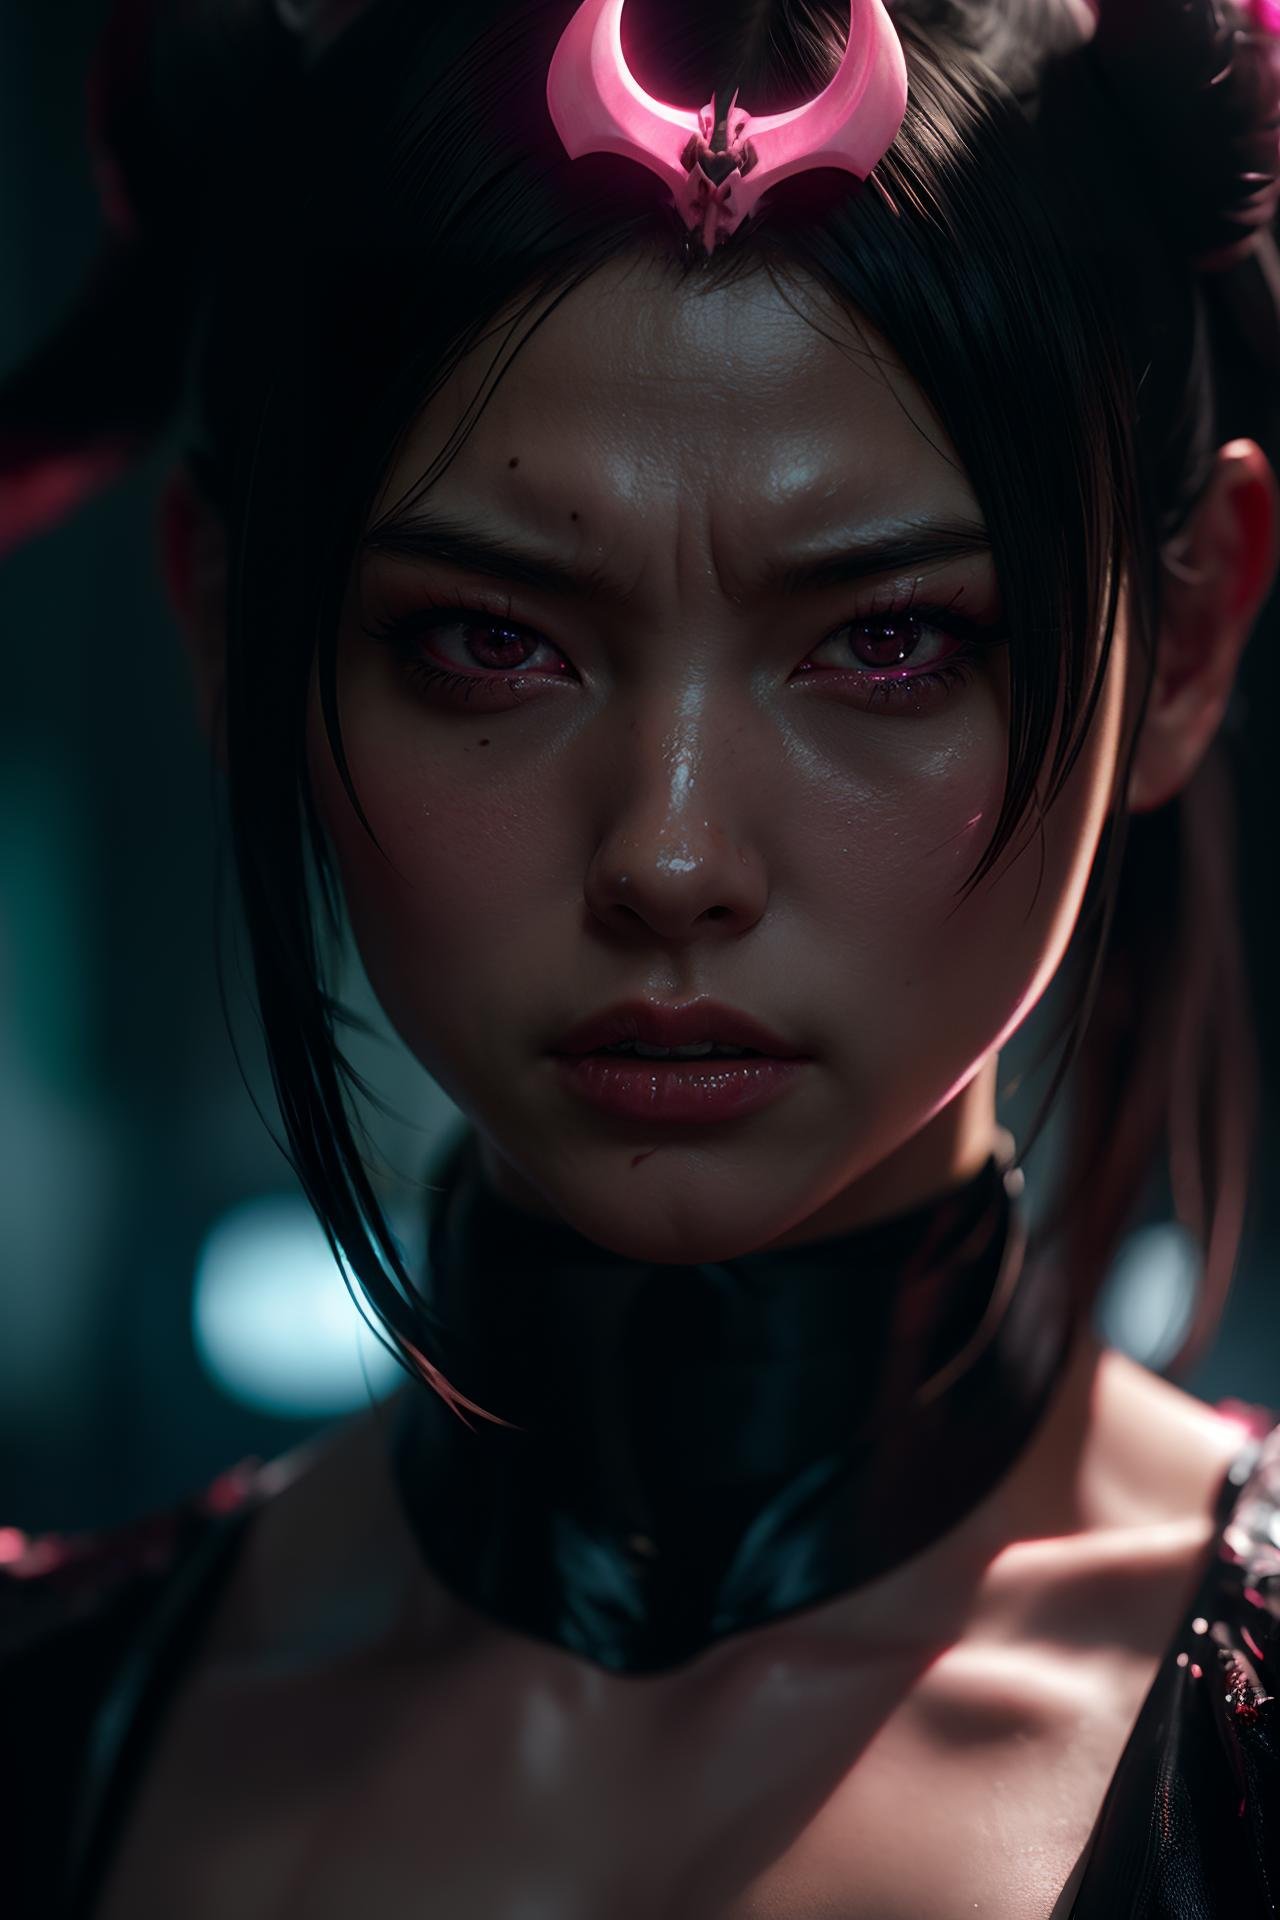 Shinjuku yenaiartist, devil character of evil spirits | delen demon, in the style of unreal engine 5, hyper - realistic sci - fi, close up, dark white and light pink, eroded interiors, cranberrycore, elegant, emotive faces